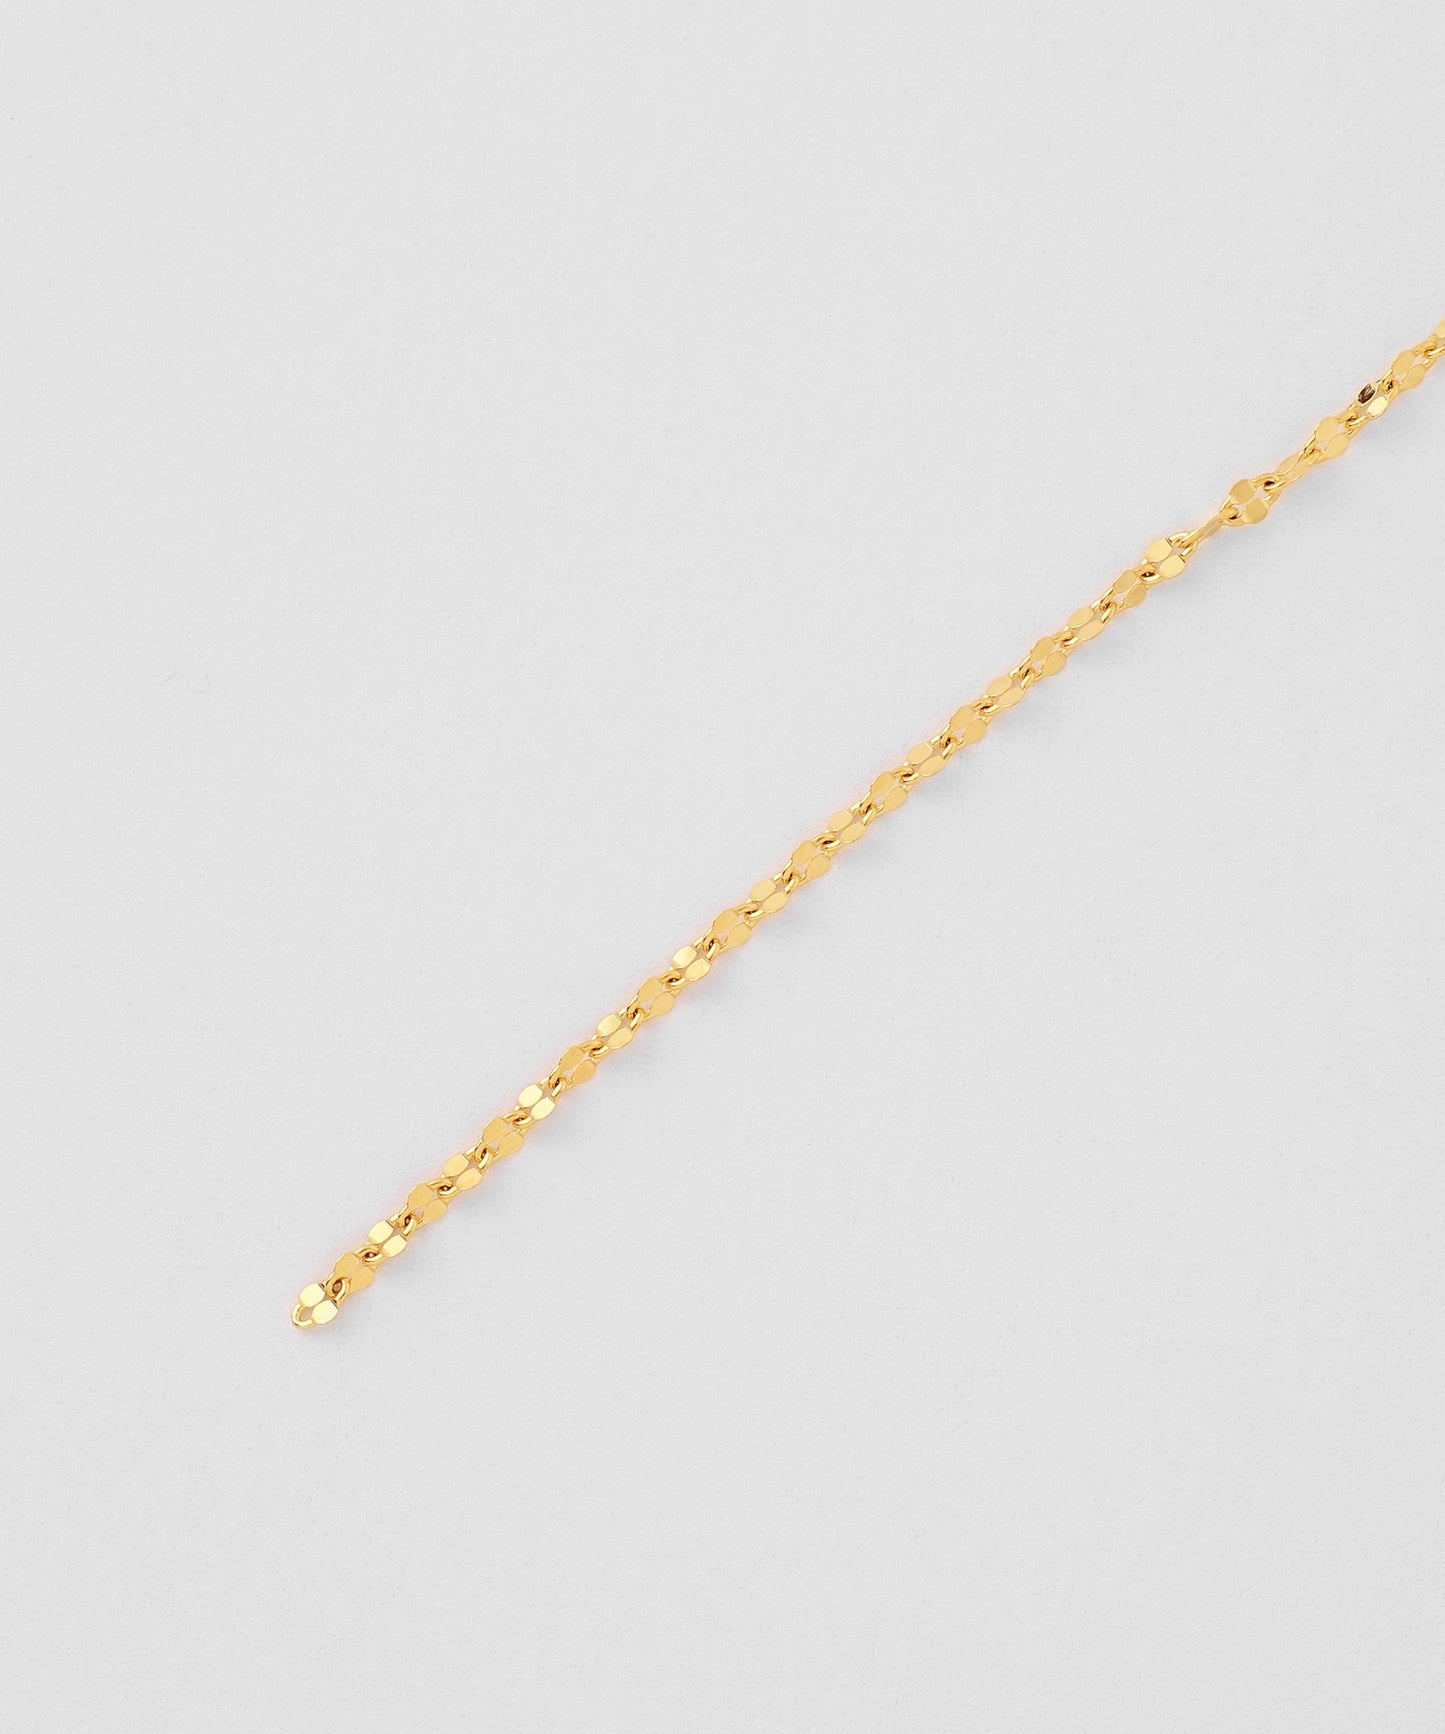 Eclair chain Y Shaped Necklace